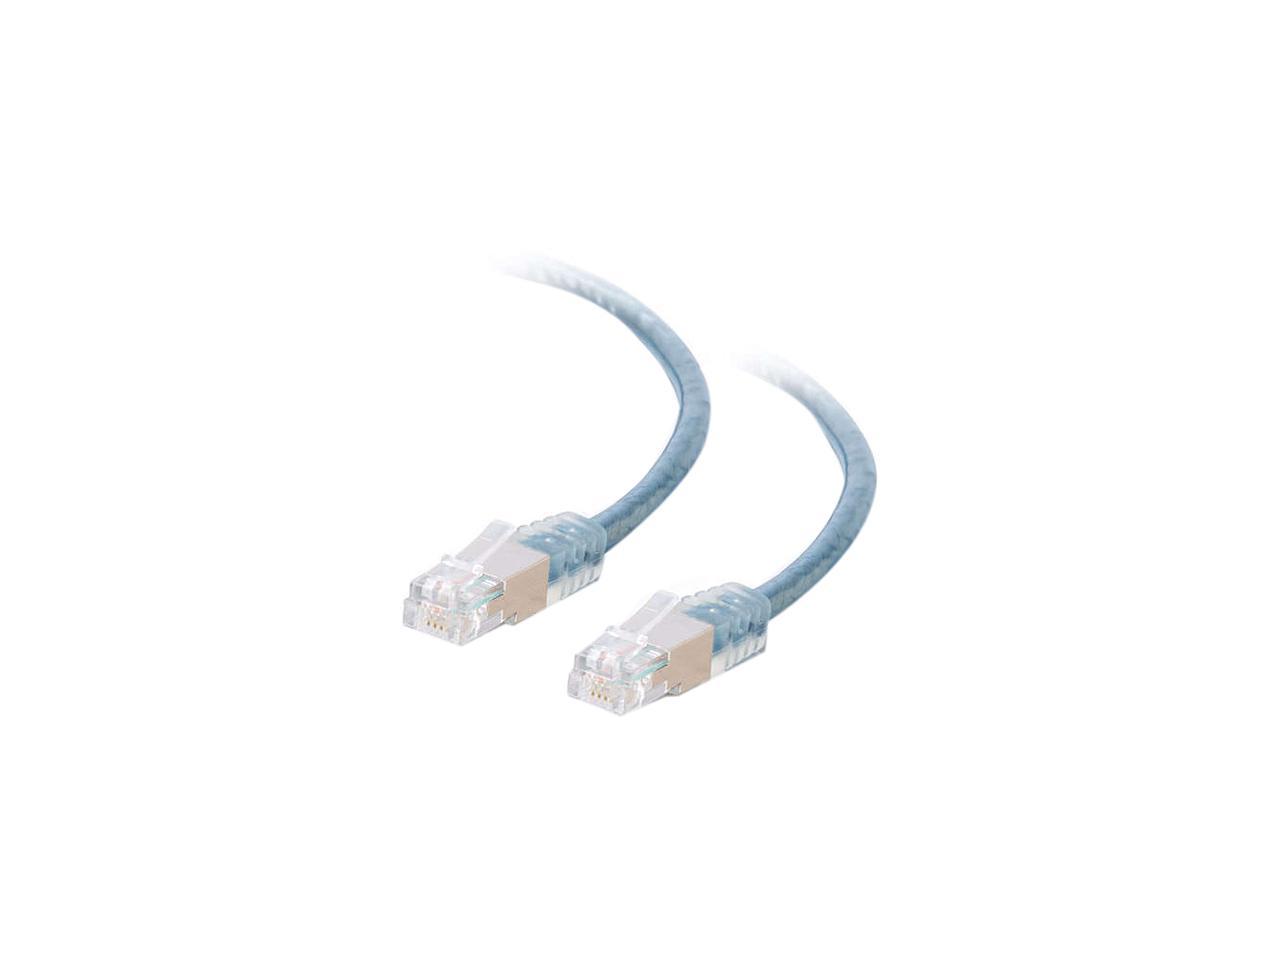 C2G High-Speed Internet Modem Cable phone cable - 15 ft - transparent blue - image 1 of 2